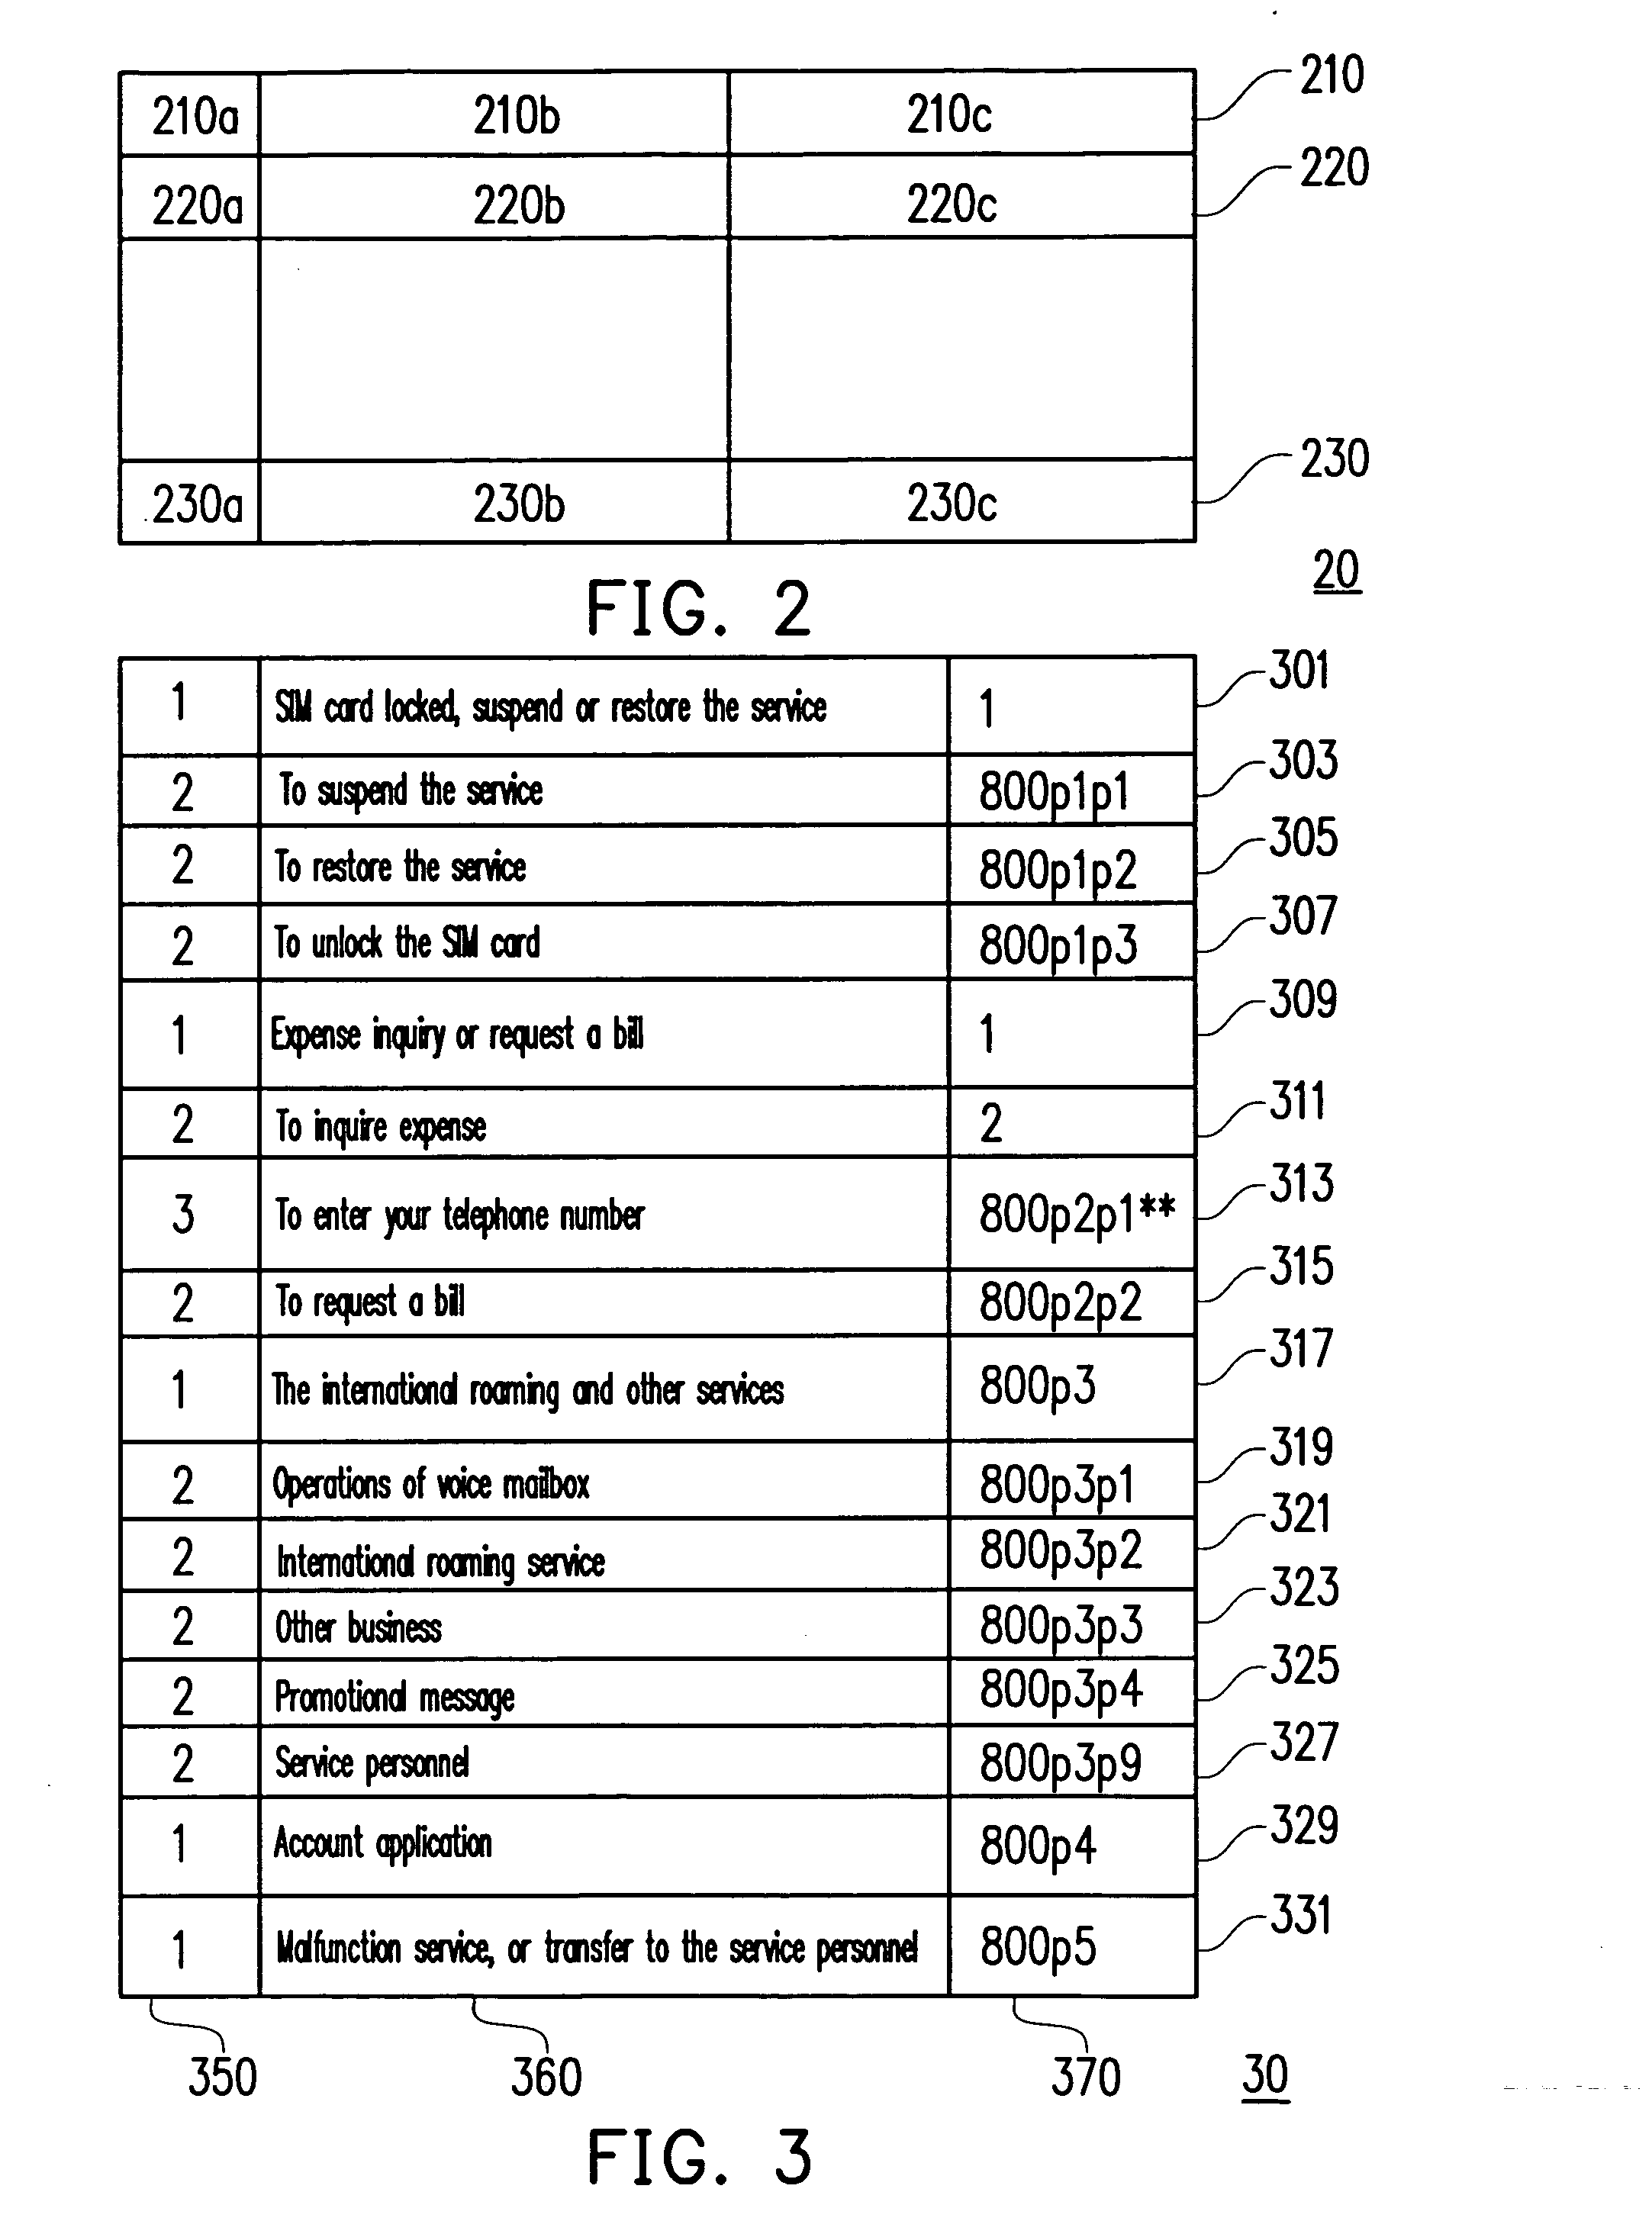 Automatic dialing-up system for communication apparatus